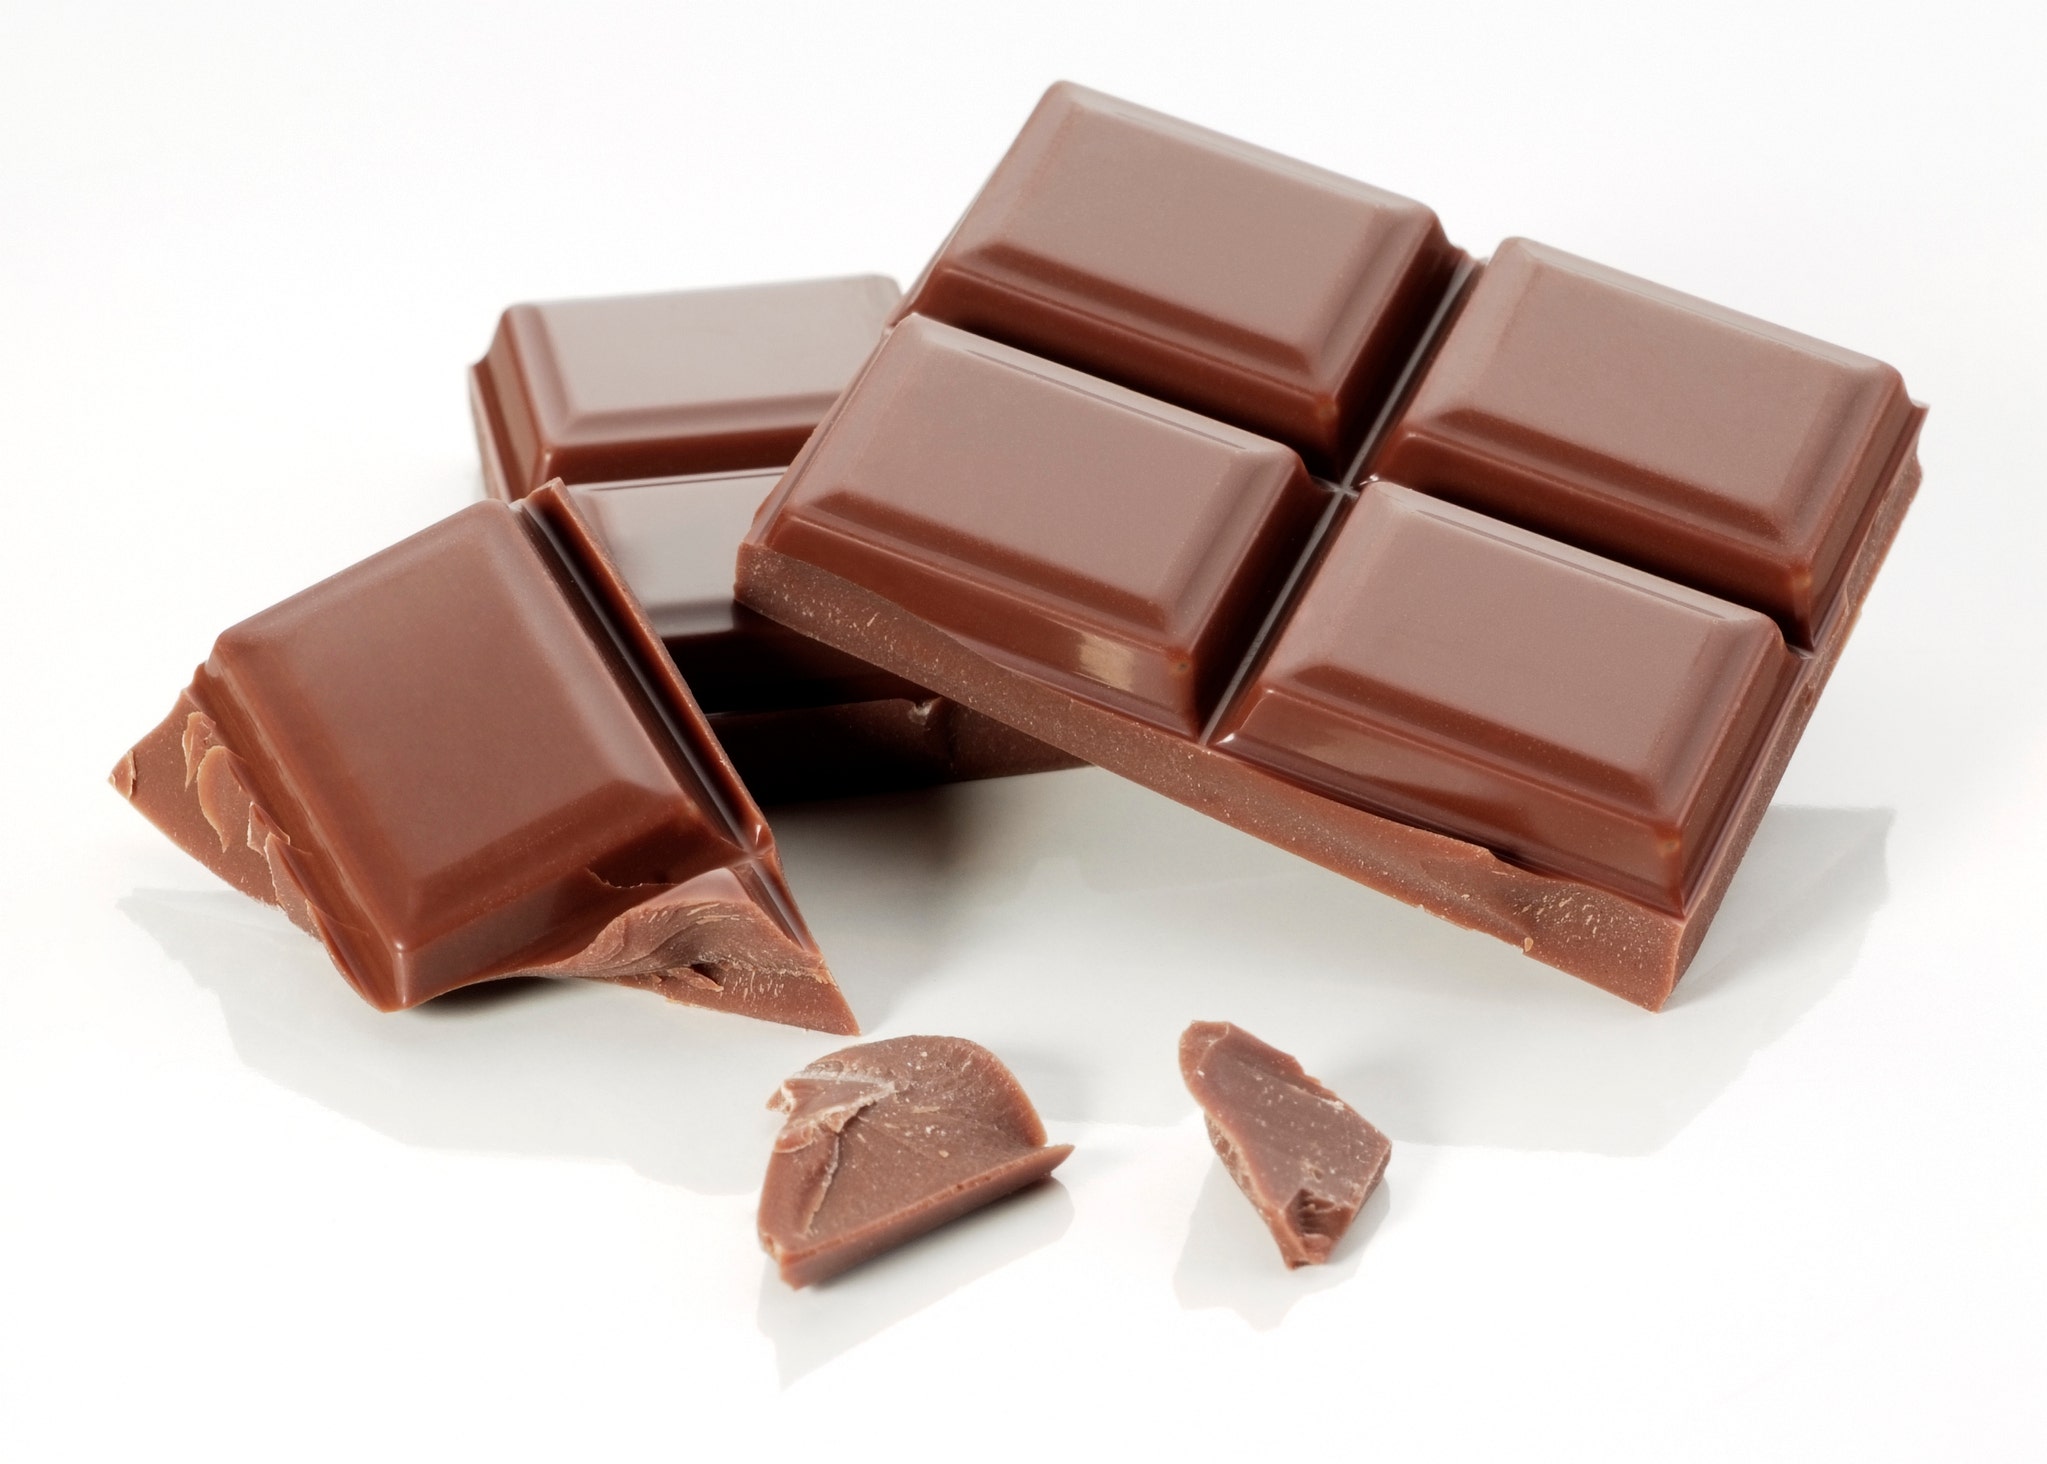 Chocolate for breakfast? Study suggests potential benefits